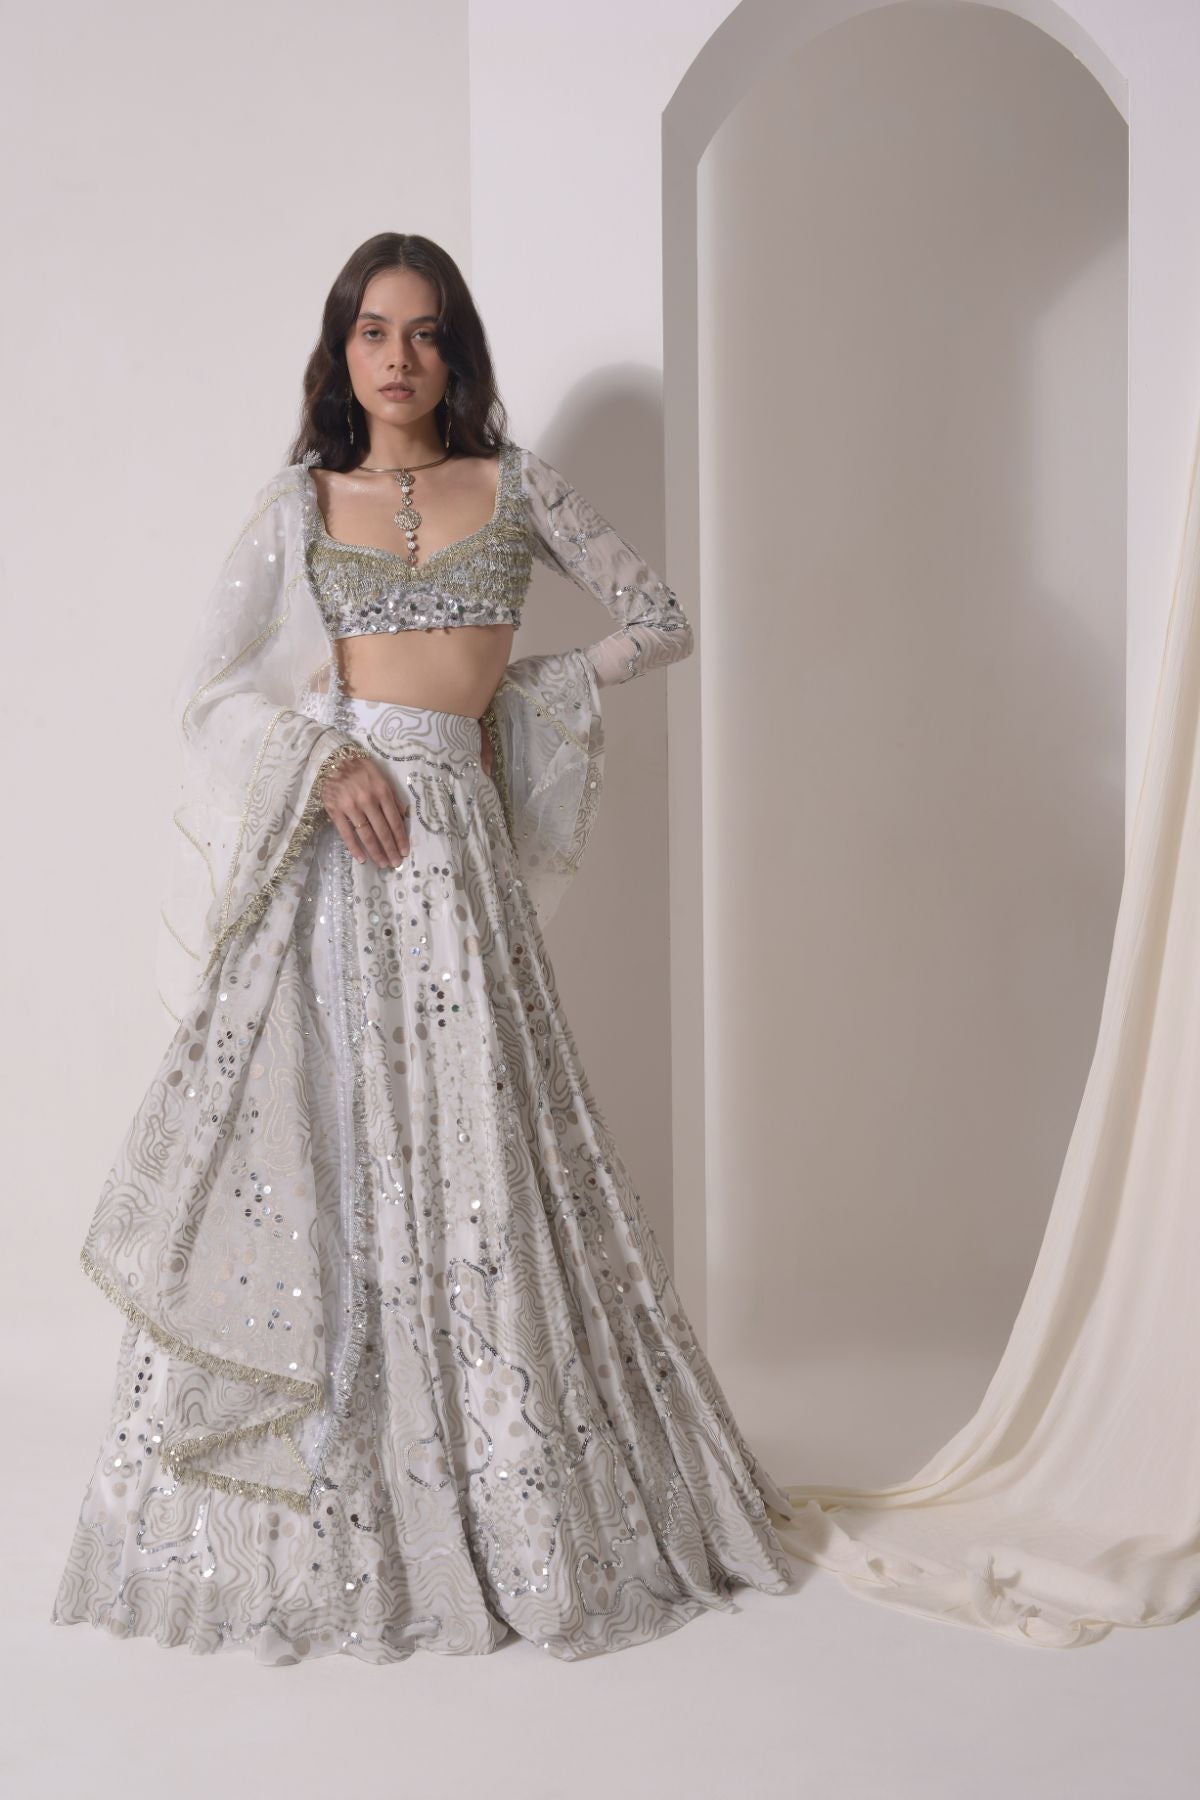 Charcoal Grey Flower Lehenga With a strappy mirror blouse - Vvani by Vani  Vats- Fabilicious Fashion